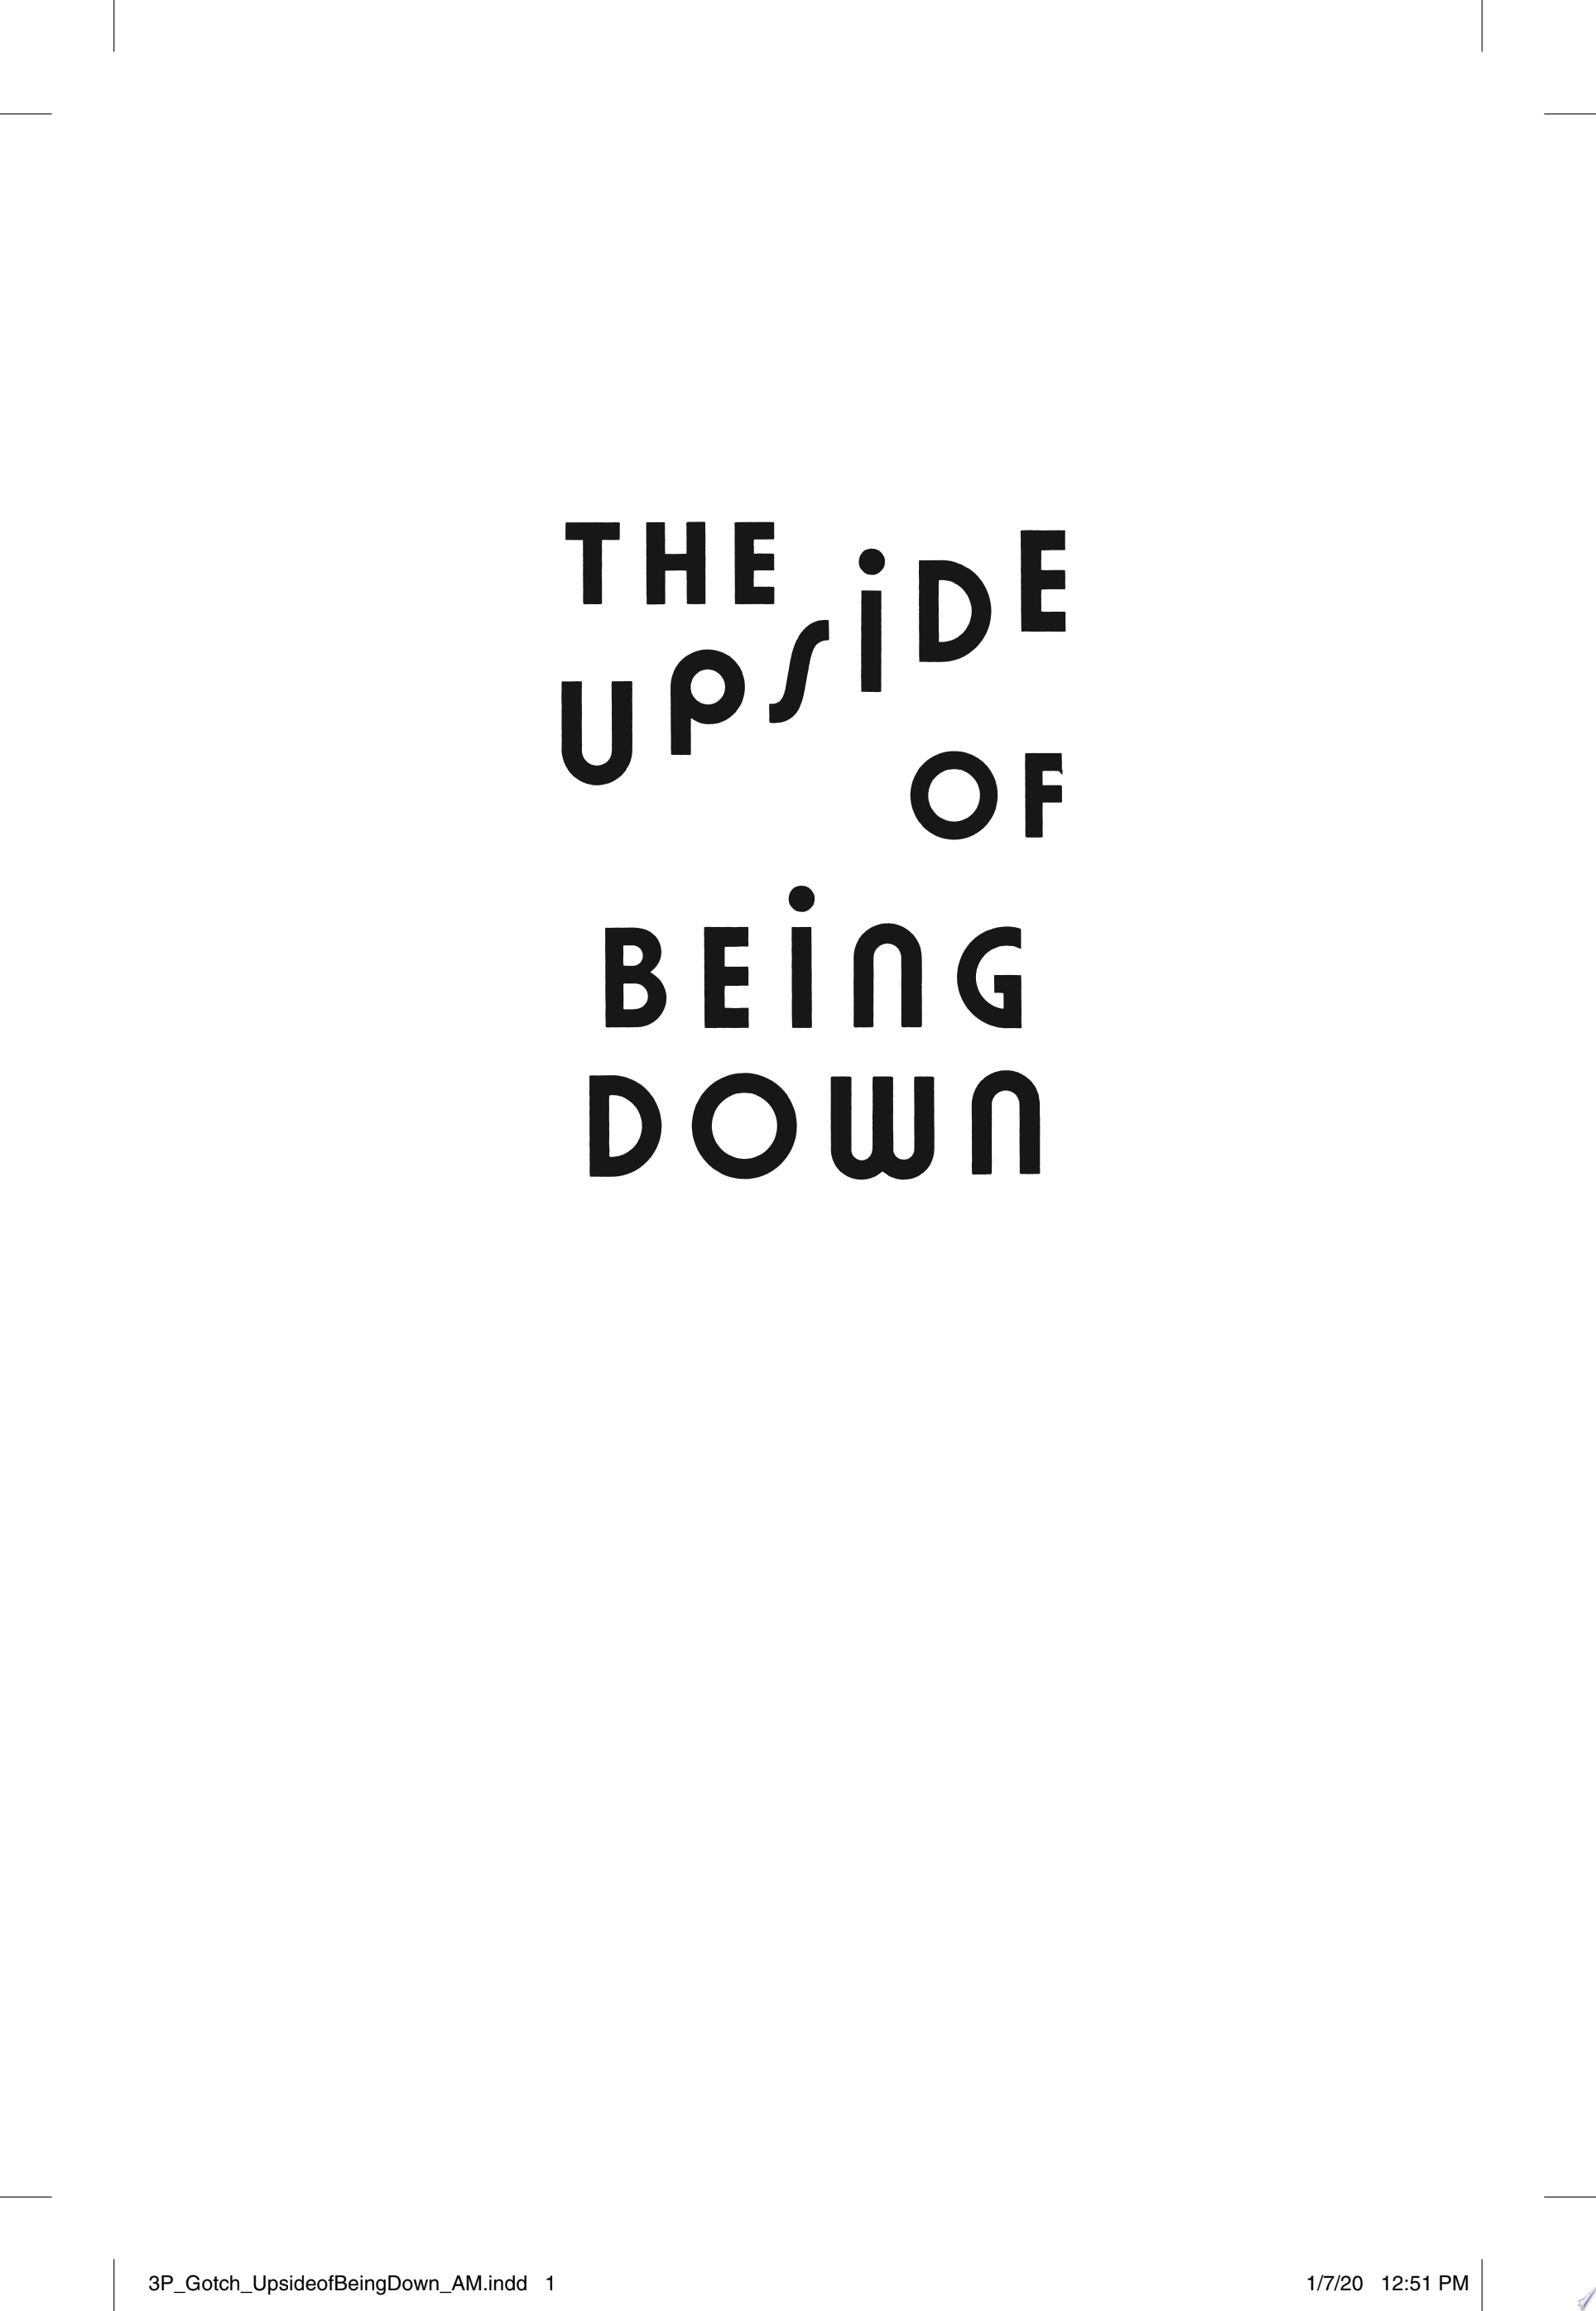 Image for "The Upside of Being Down"